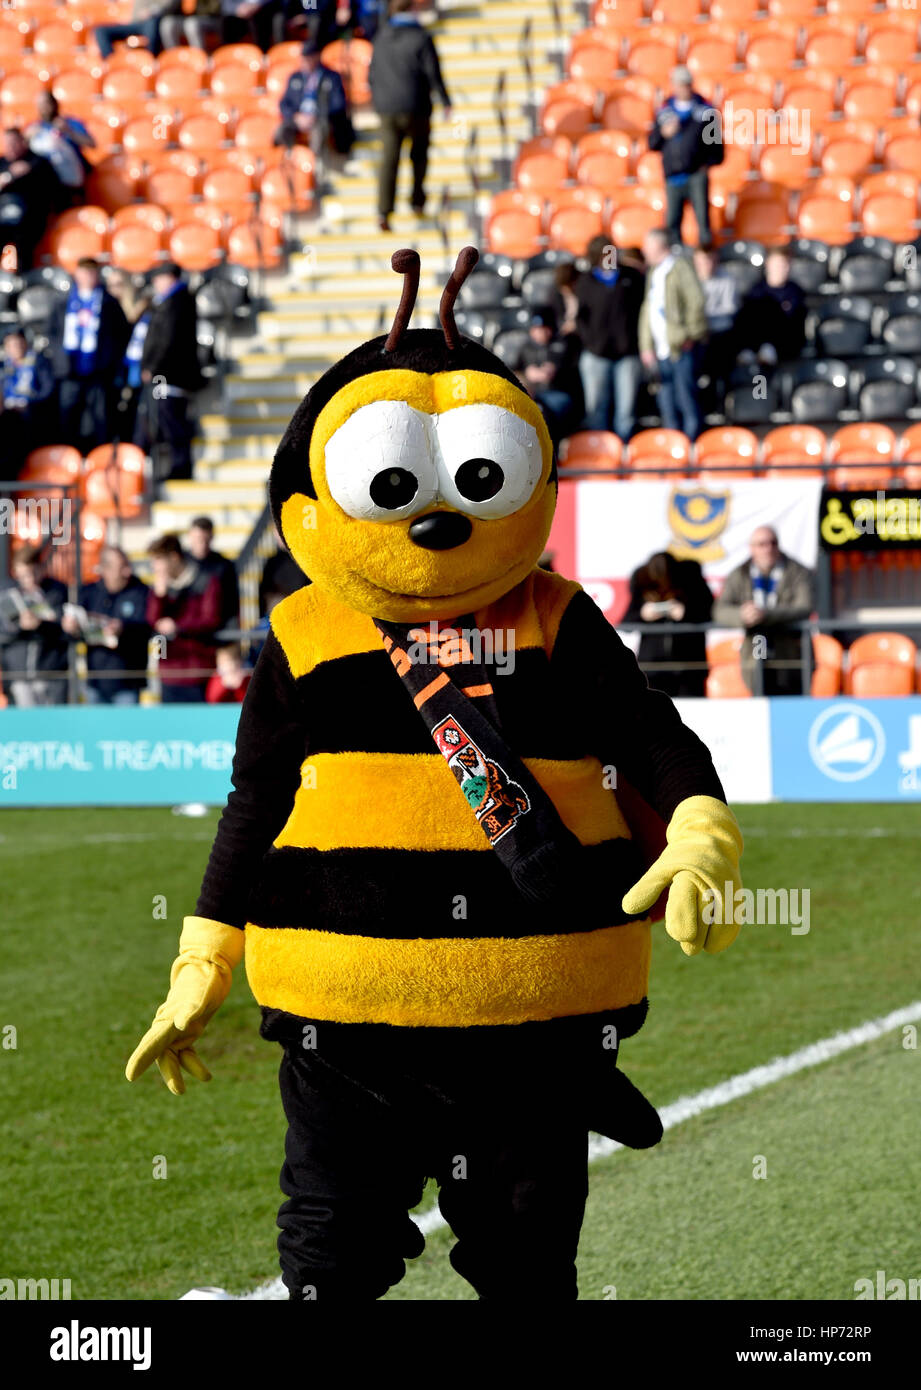 The Barnet Bee mascot during the Sky Bet League 2 match between Barnet and Portsmouth at The Hive Stadium in London. February 18, 2017. - Editorial use only. No merchandising. For Football images FA and Premier League restrictions apply inc. no internet/mobile usage without FAPL license - for details contact Football Dataco Stock Photo